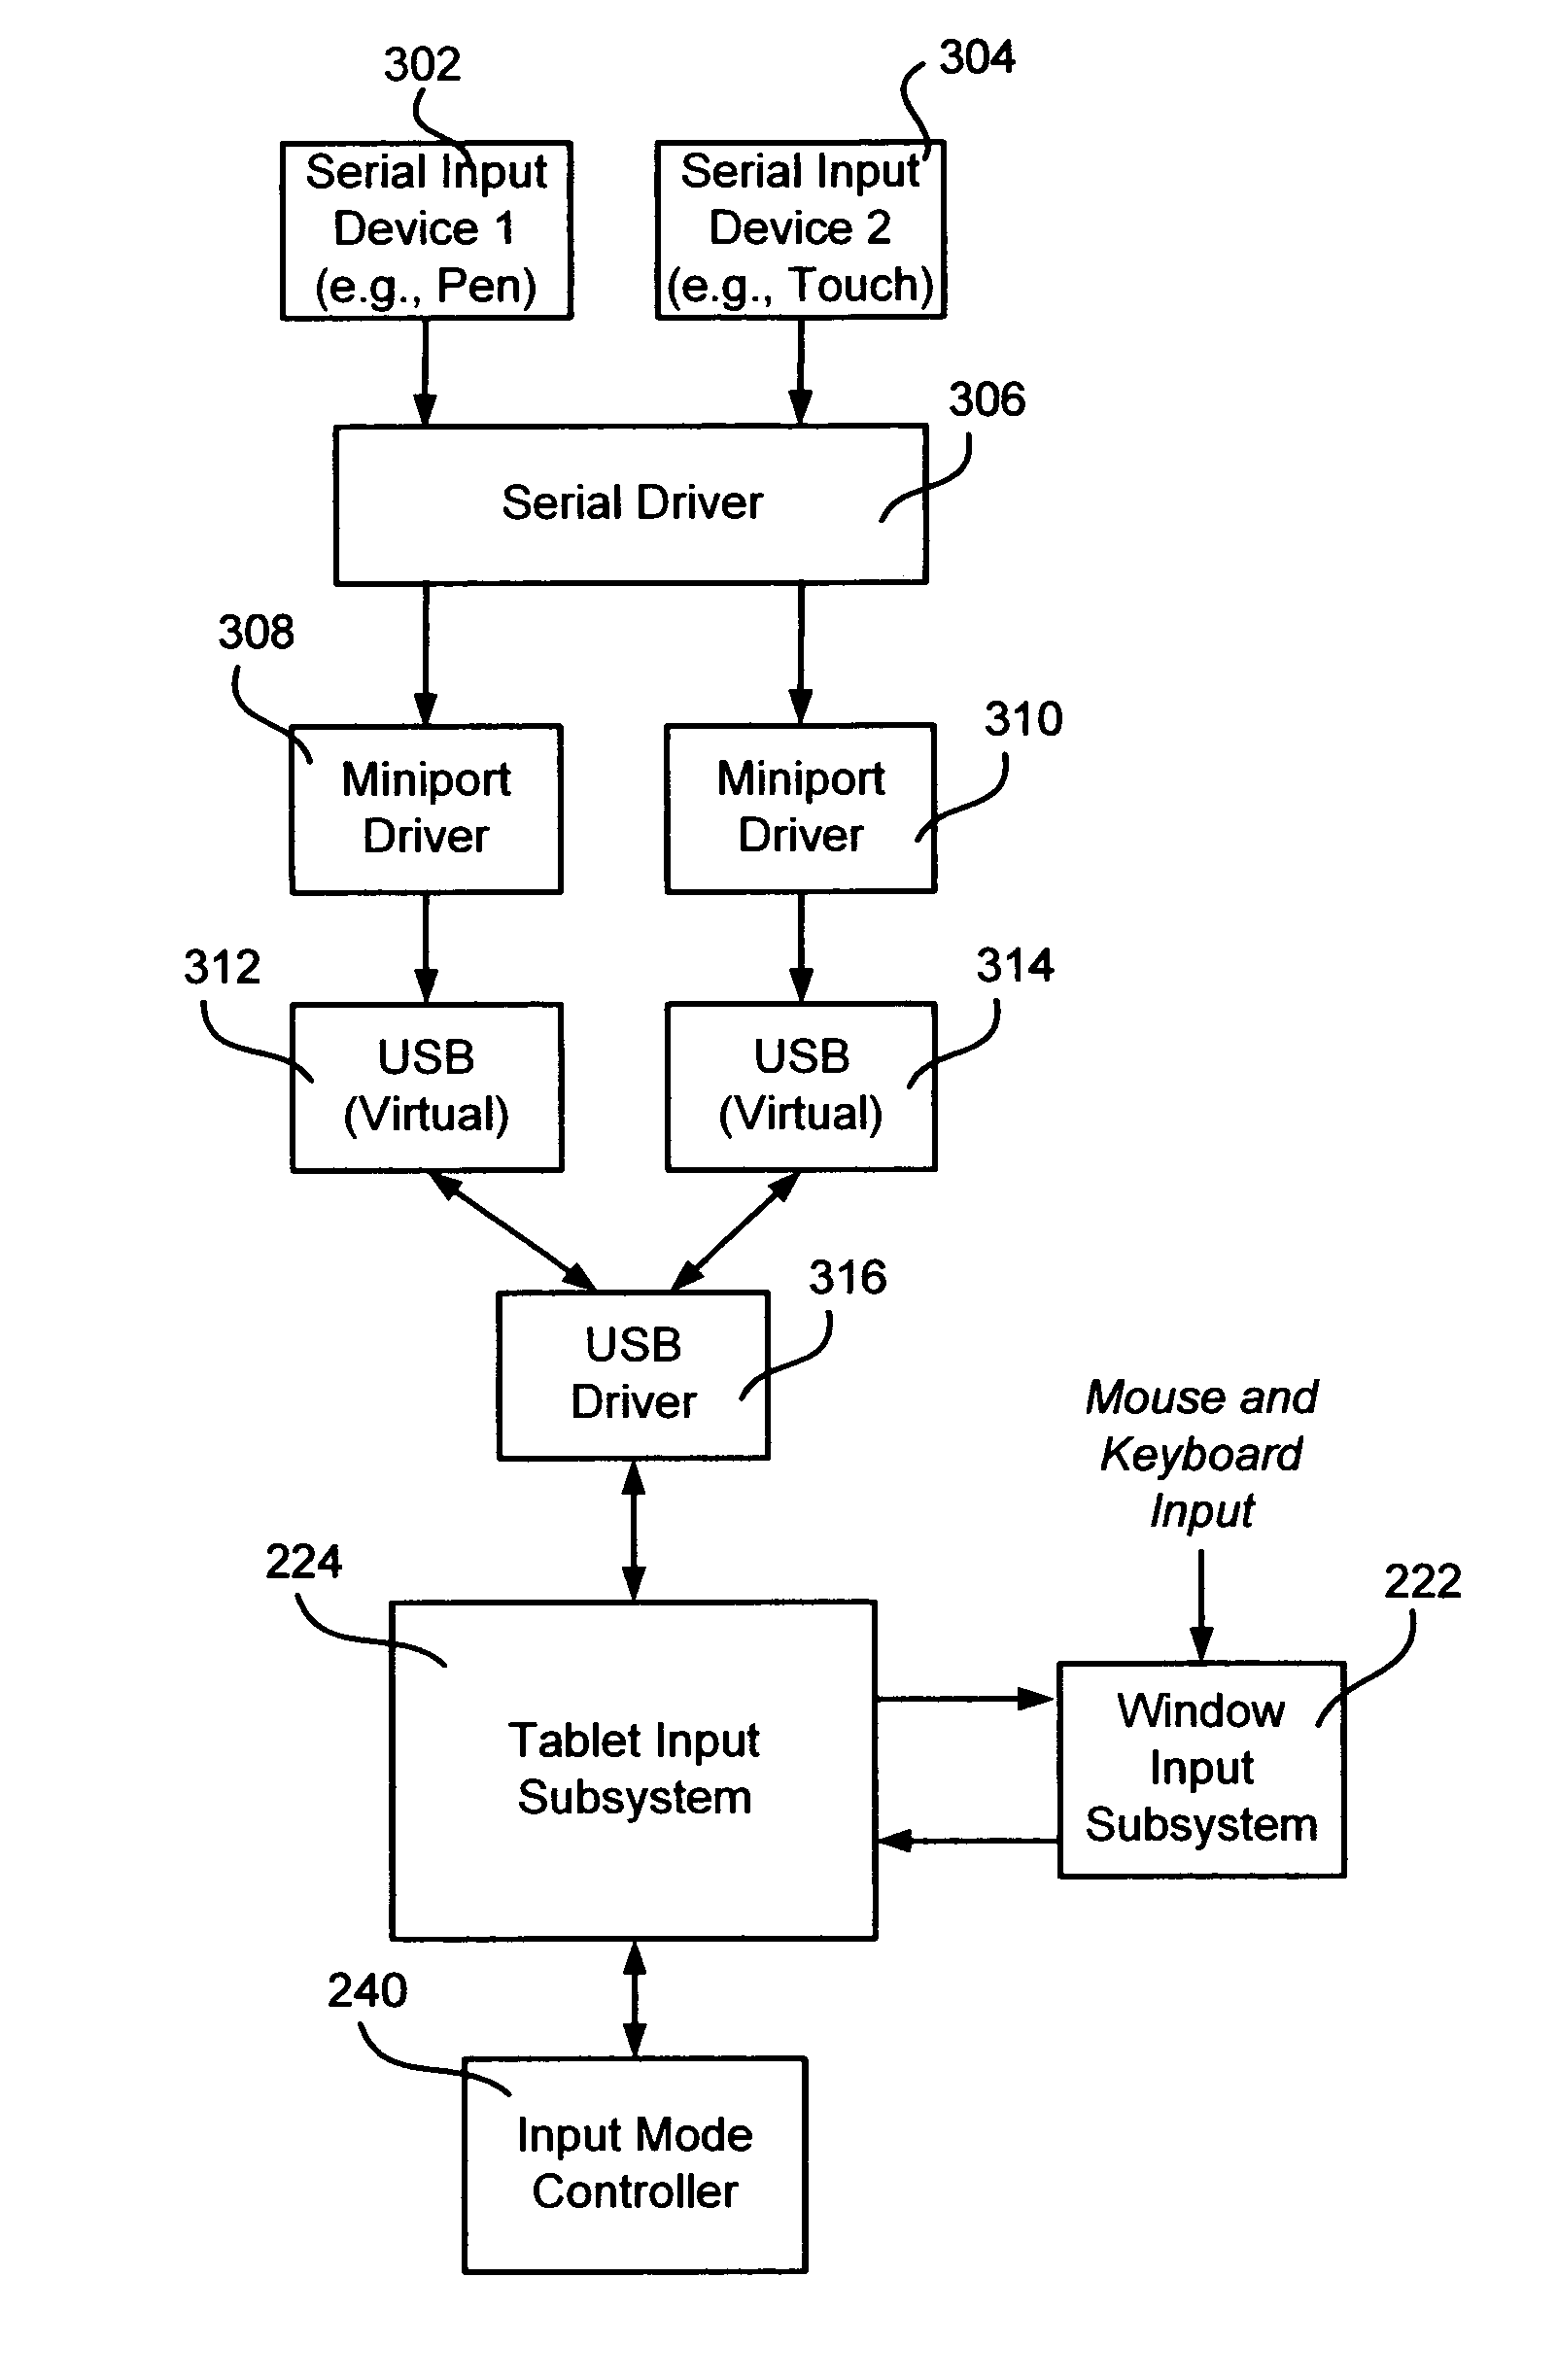 Computer interaction based upon a currently active input device